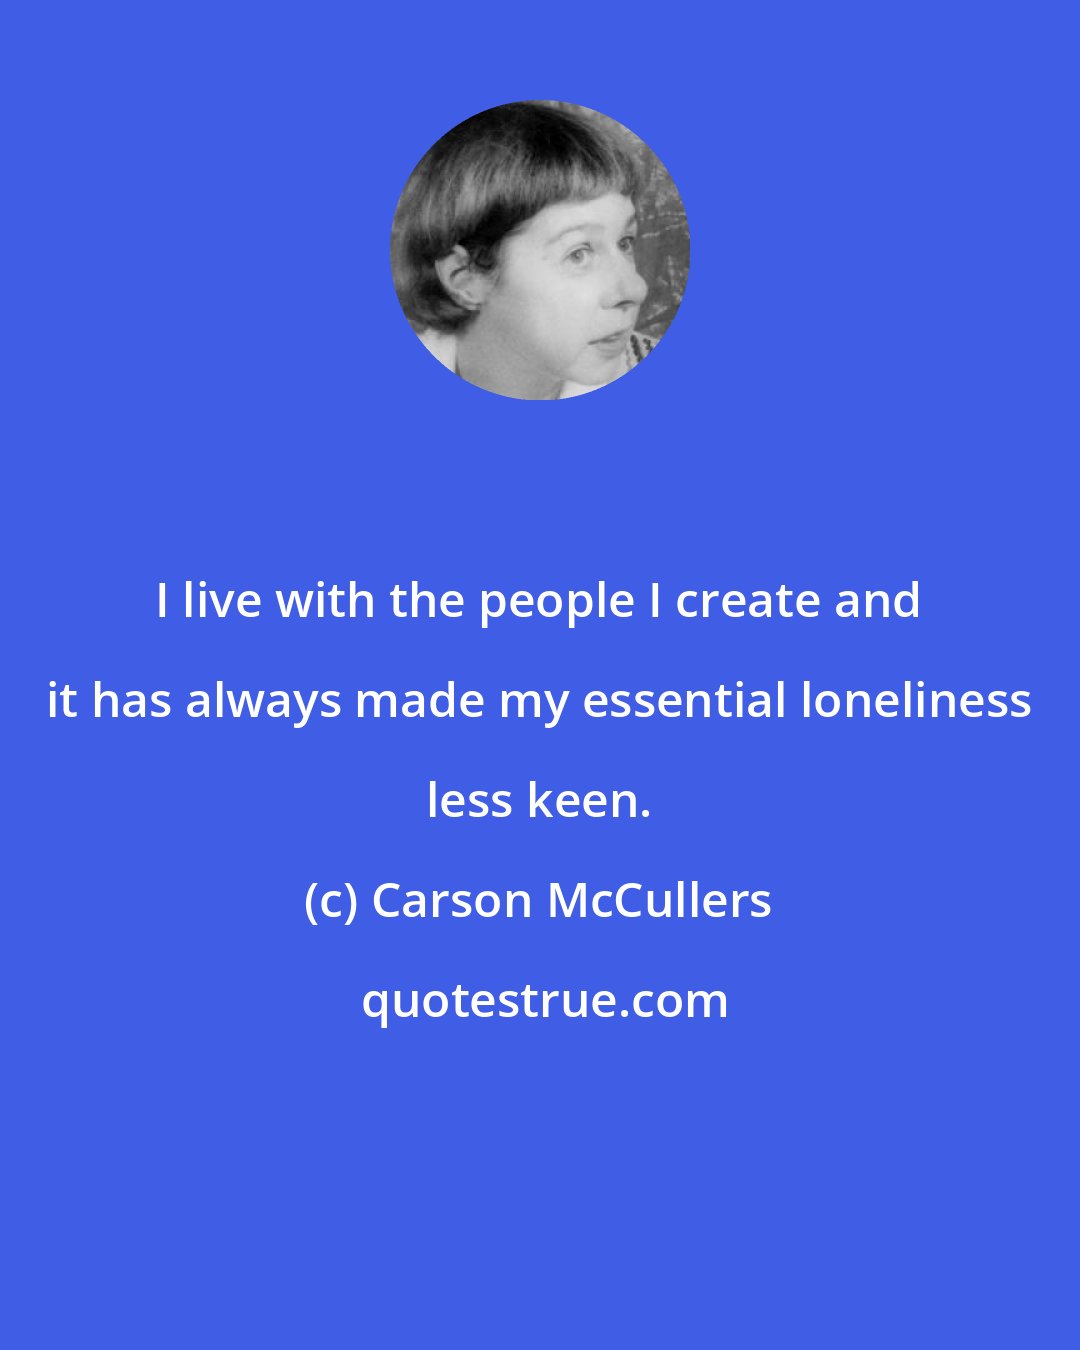 Carson McCullers: I live with the people I create and it has always made my essential loneliness less keen.